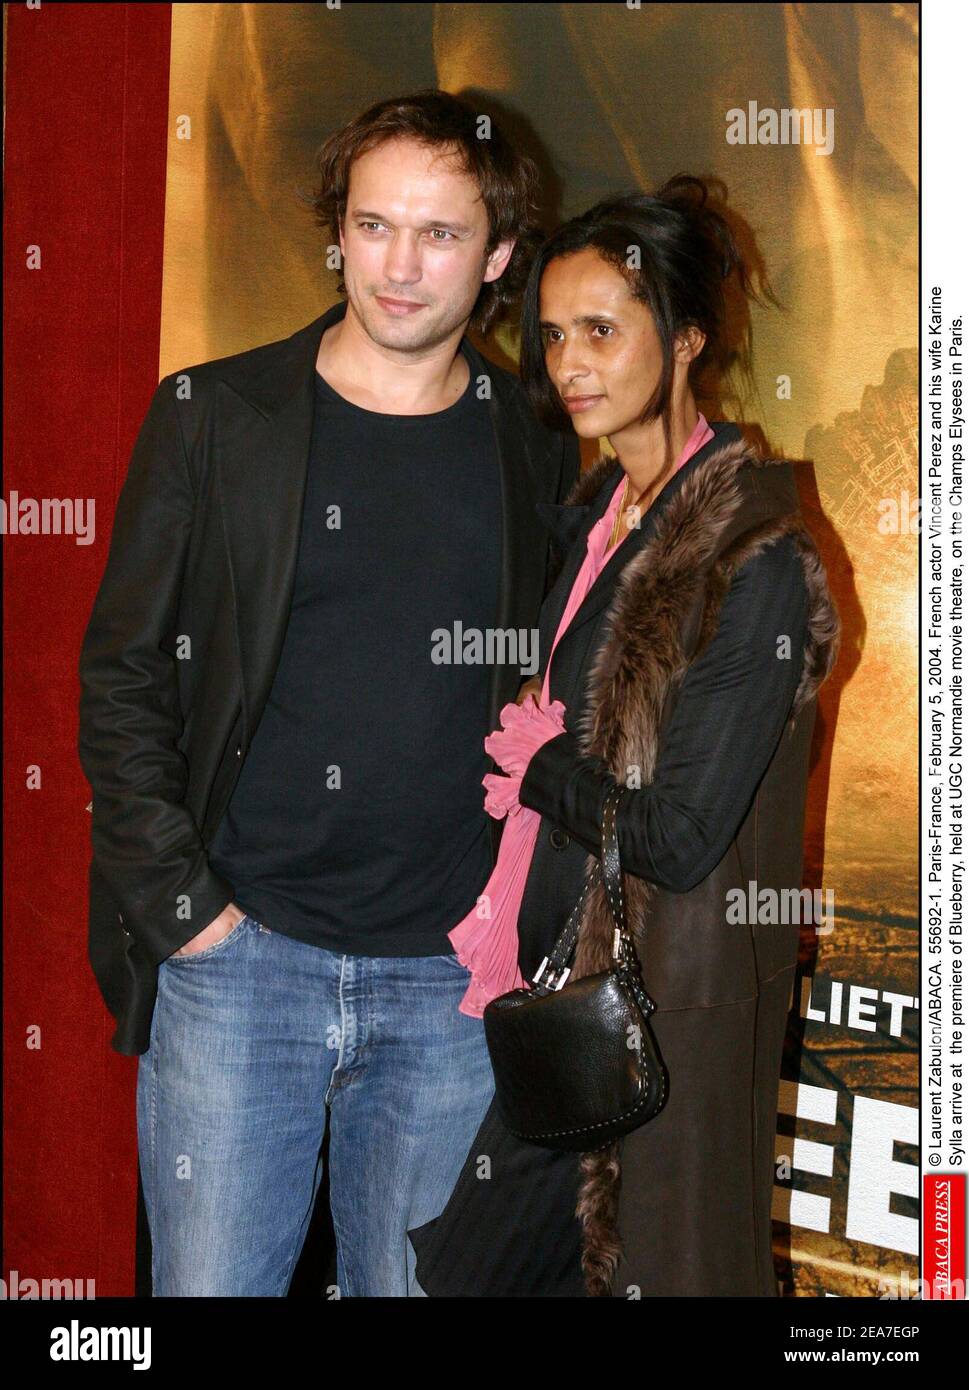 © Laurent Zabulon/ABACA. 55692-1. Paris-France, February 5, 2004. Swiss actor Vincent Perez and his wife Karine Sylla arrive at the premiere of Blueberry, held at UGC Normandie movie theatre, on the Champs Elysees in Paris. Stock Photo